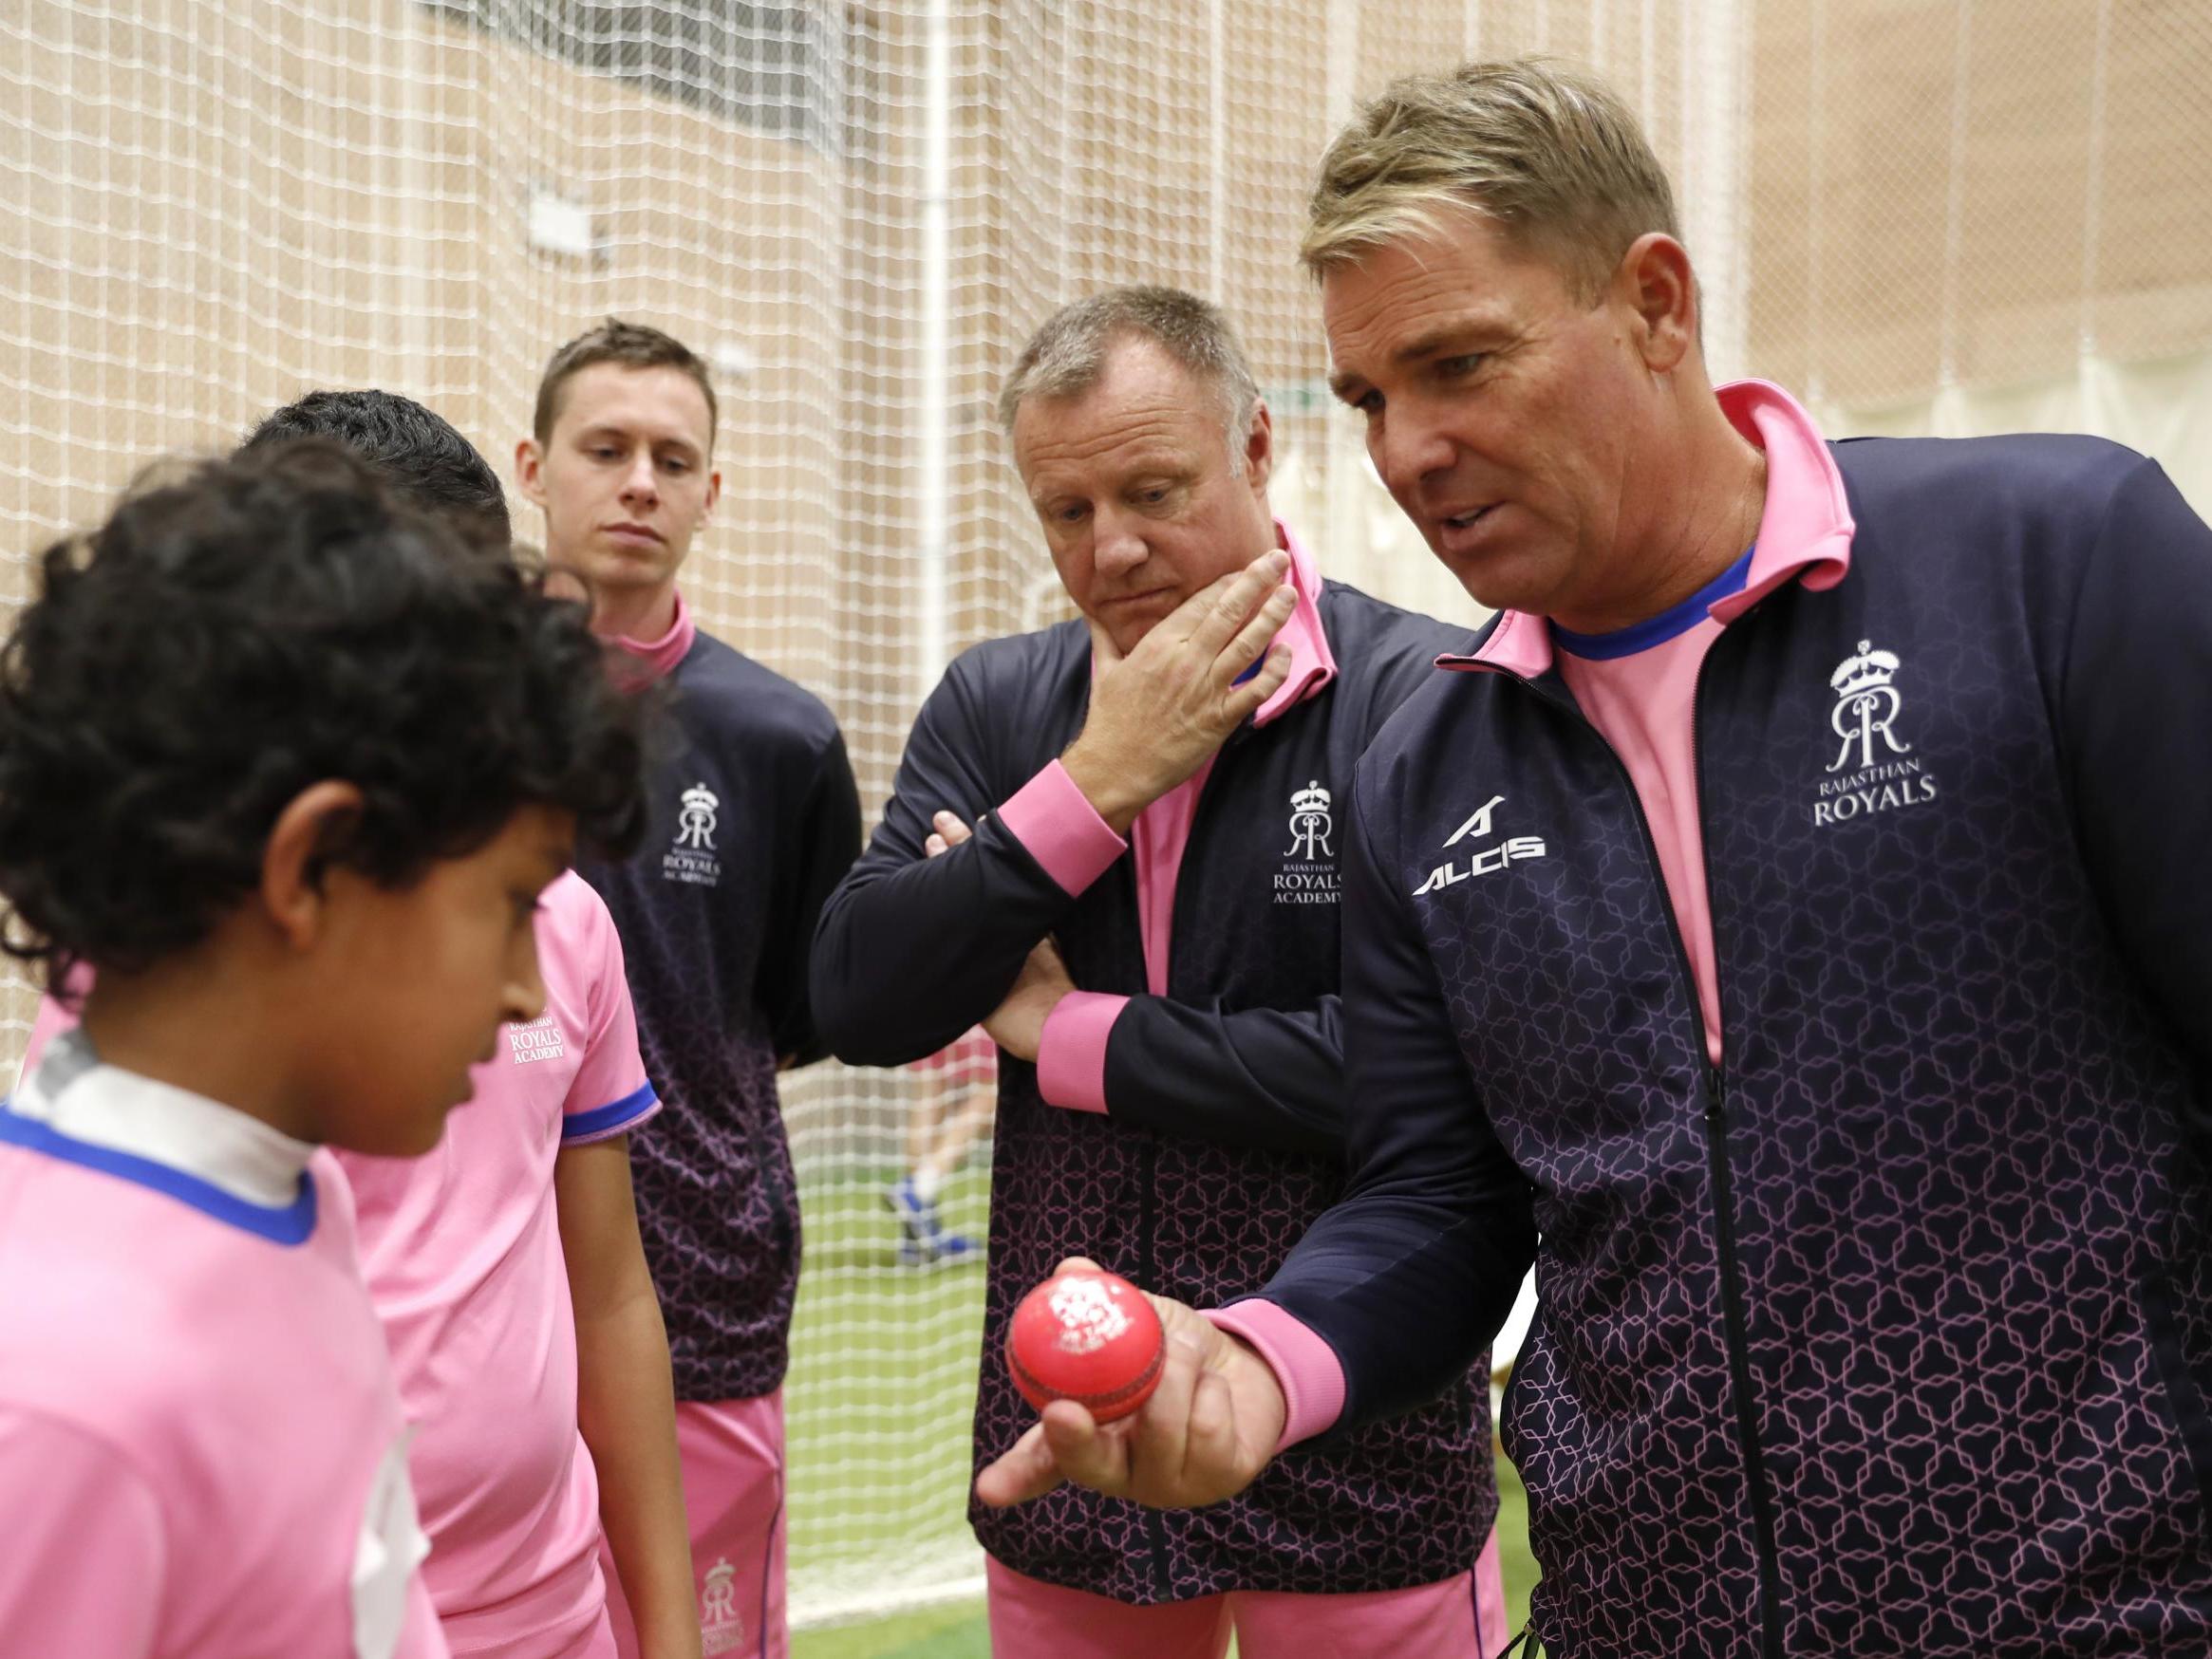 Shane Warne at the Rajasthan Royals UK academy in Cobham